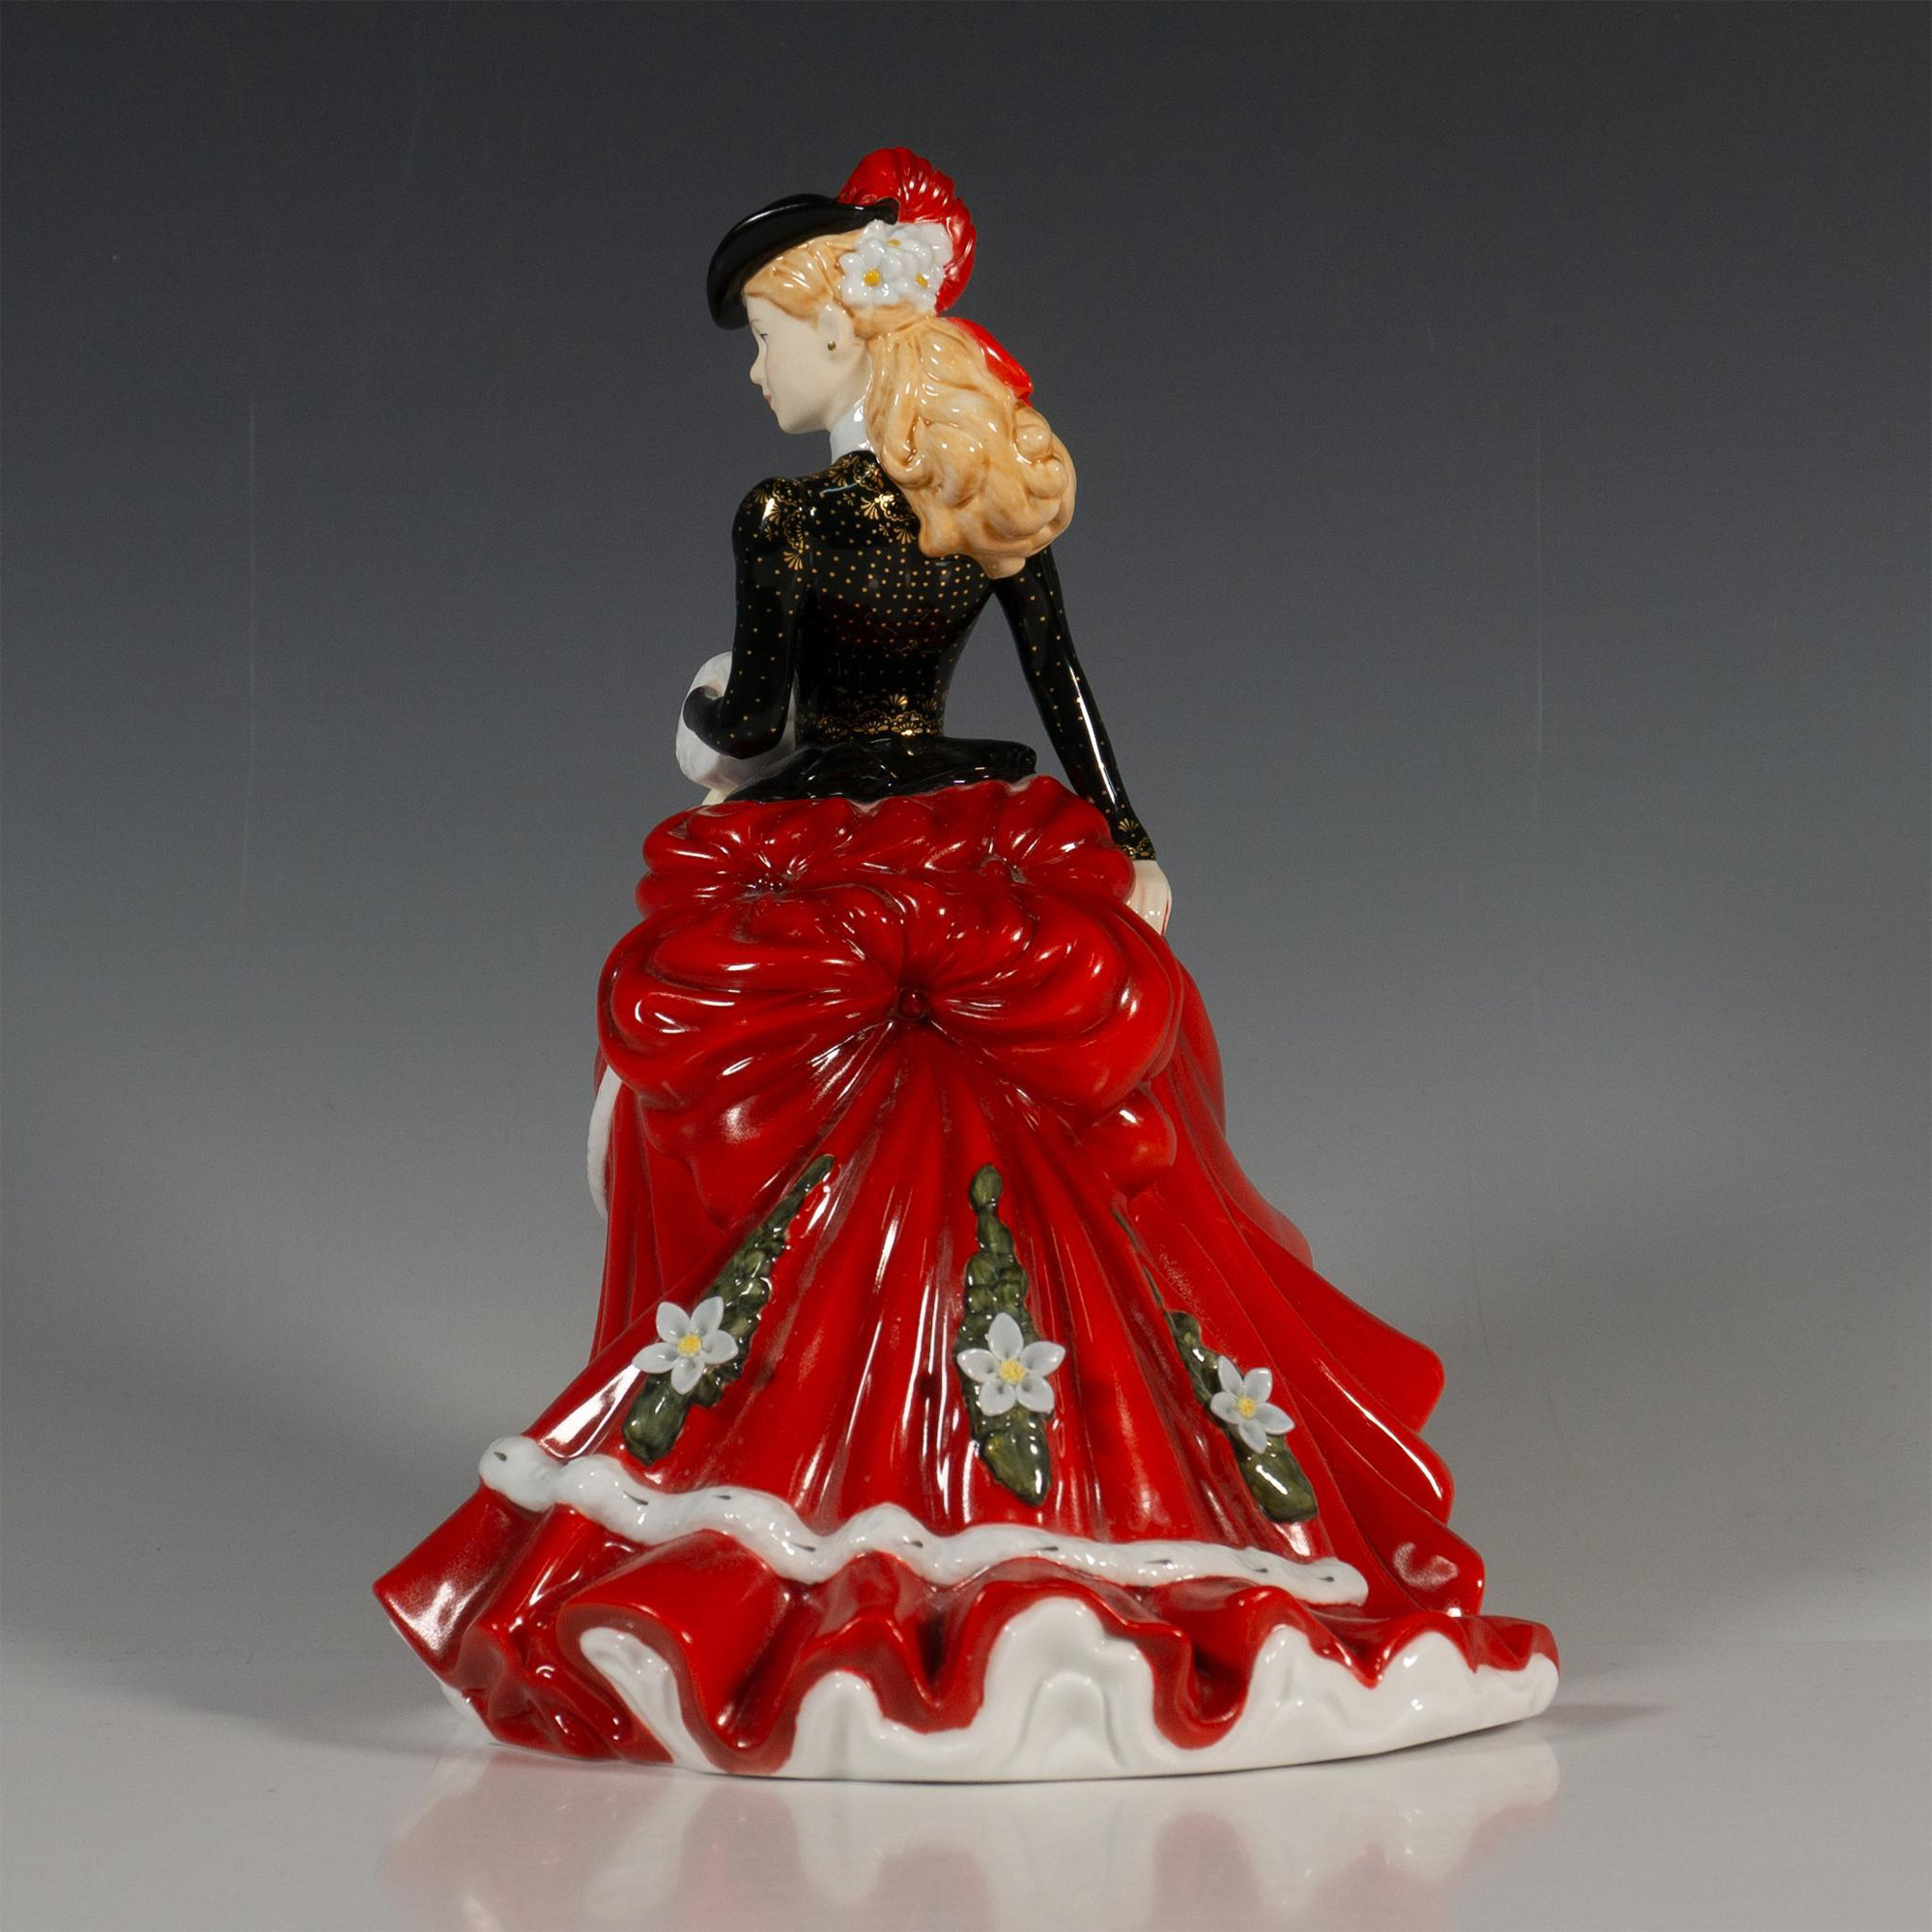 Holly HN5846 - Royal Doulton Figurine - Image 4 of 5